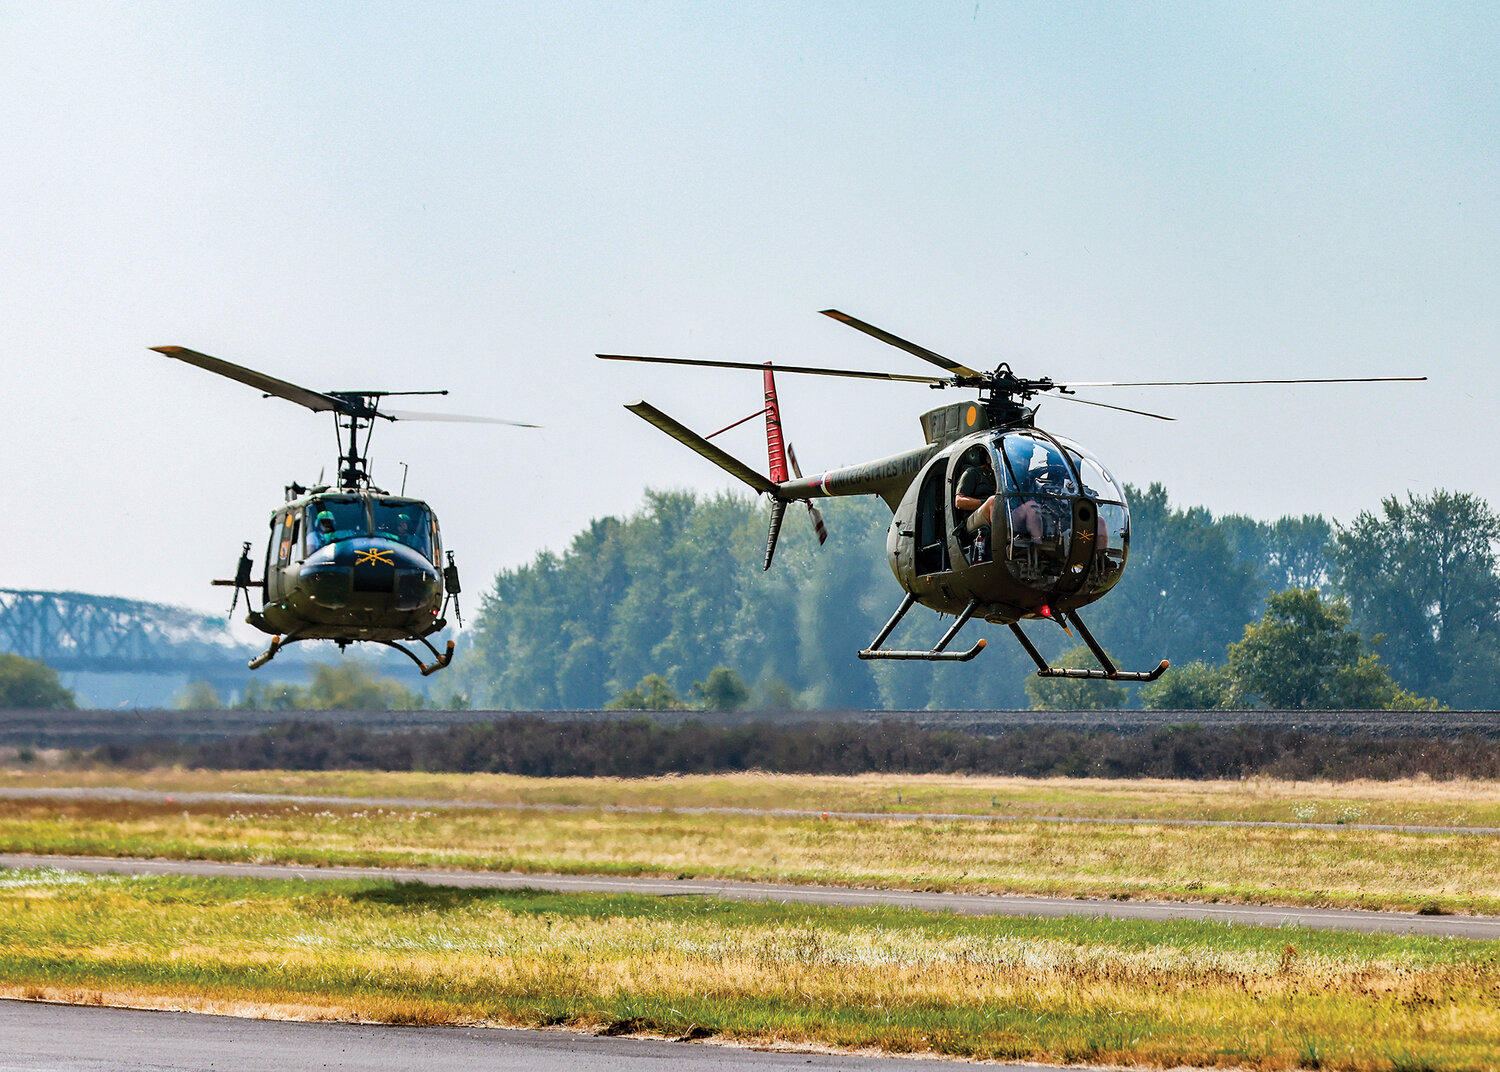 A Hughes OH-6 Cayuse “Loach” and a Bell UH-1 Iroquois “Huey” come in for a landing at the Southwest Washington Regional Airport for the third annual fly-in event at Cascade Air in Kelso on Sunday, Aug. 27. The aircraft are from The National Wings and Armor Foundation out of North Clark County.